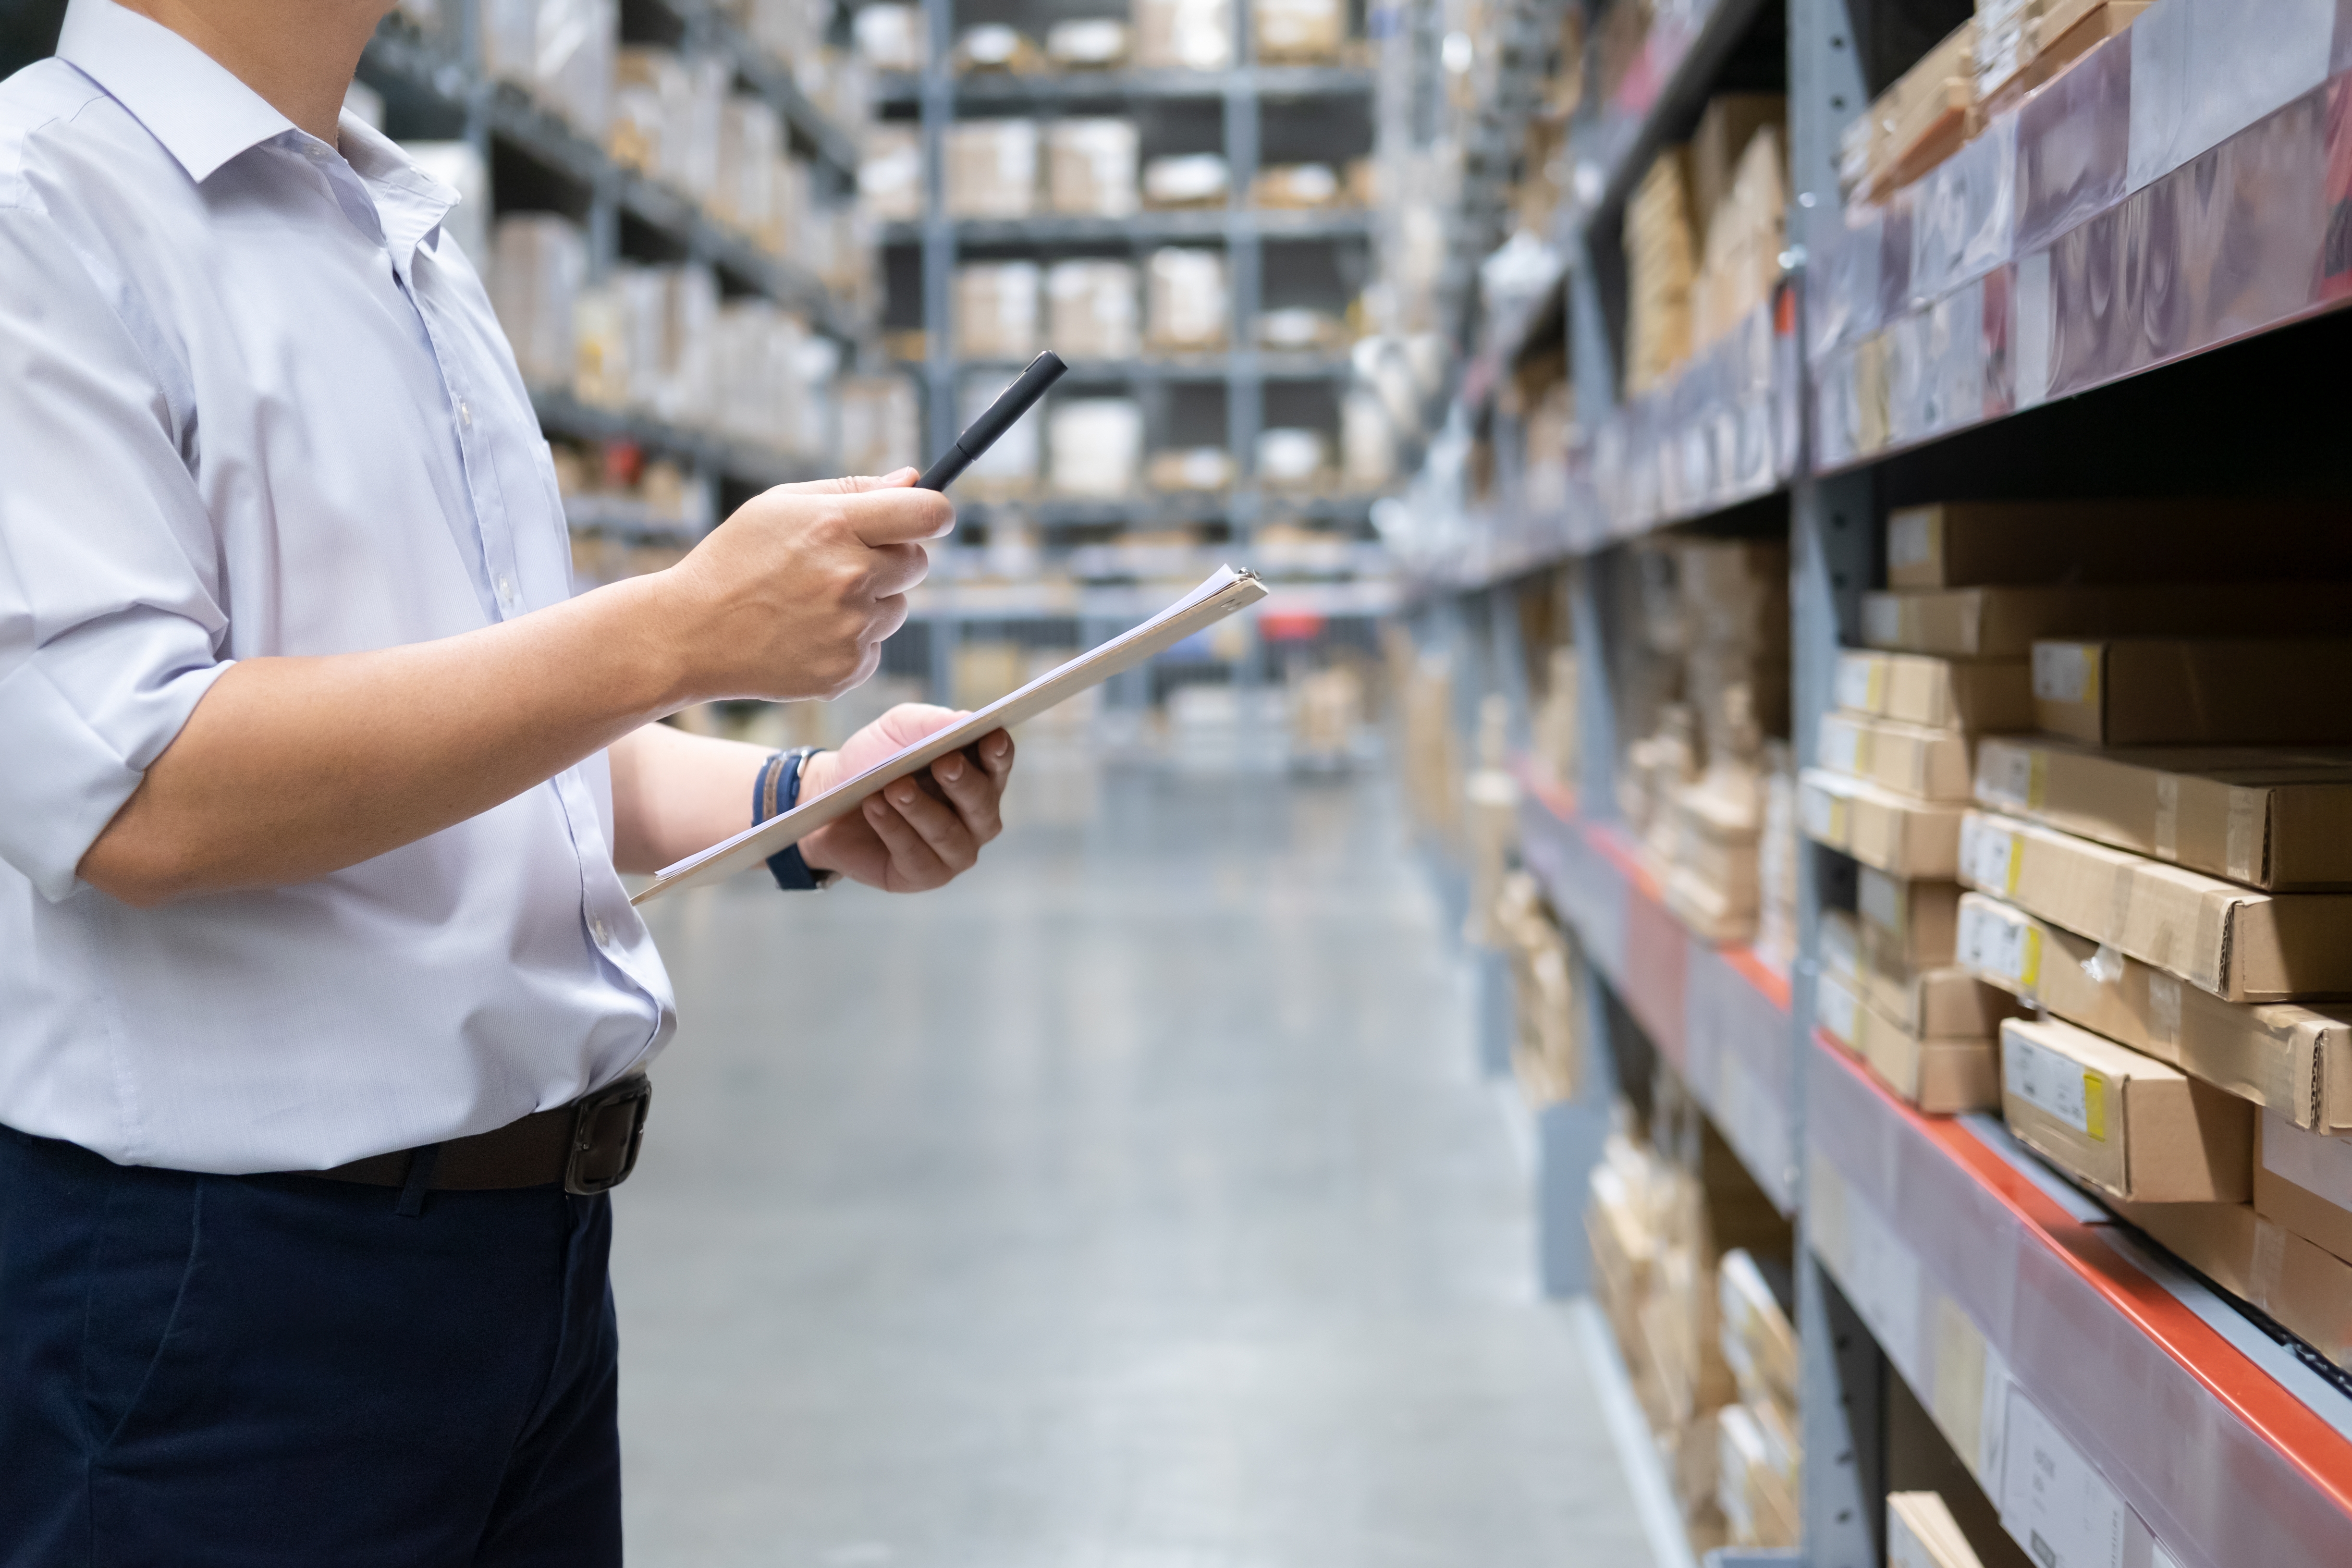 Improve Your Company’s Order Fulfillment Processes With These 4 Tips